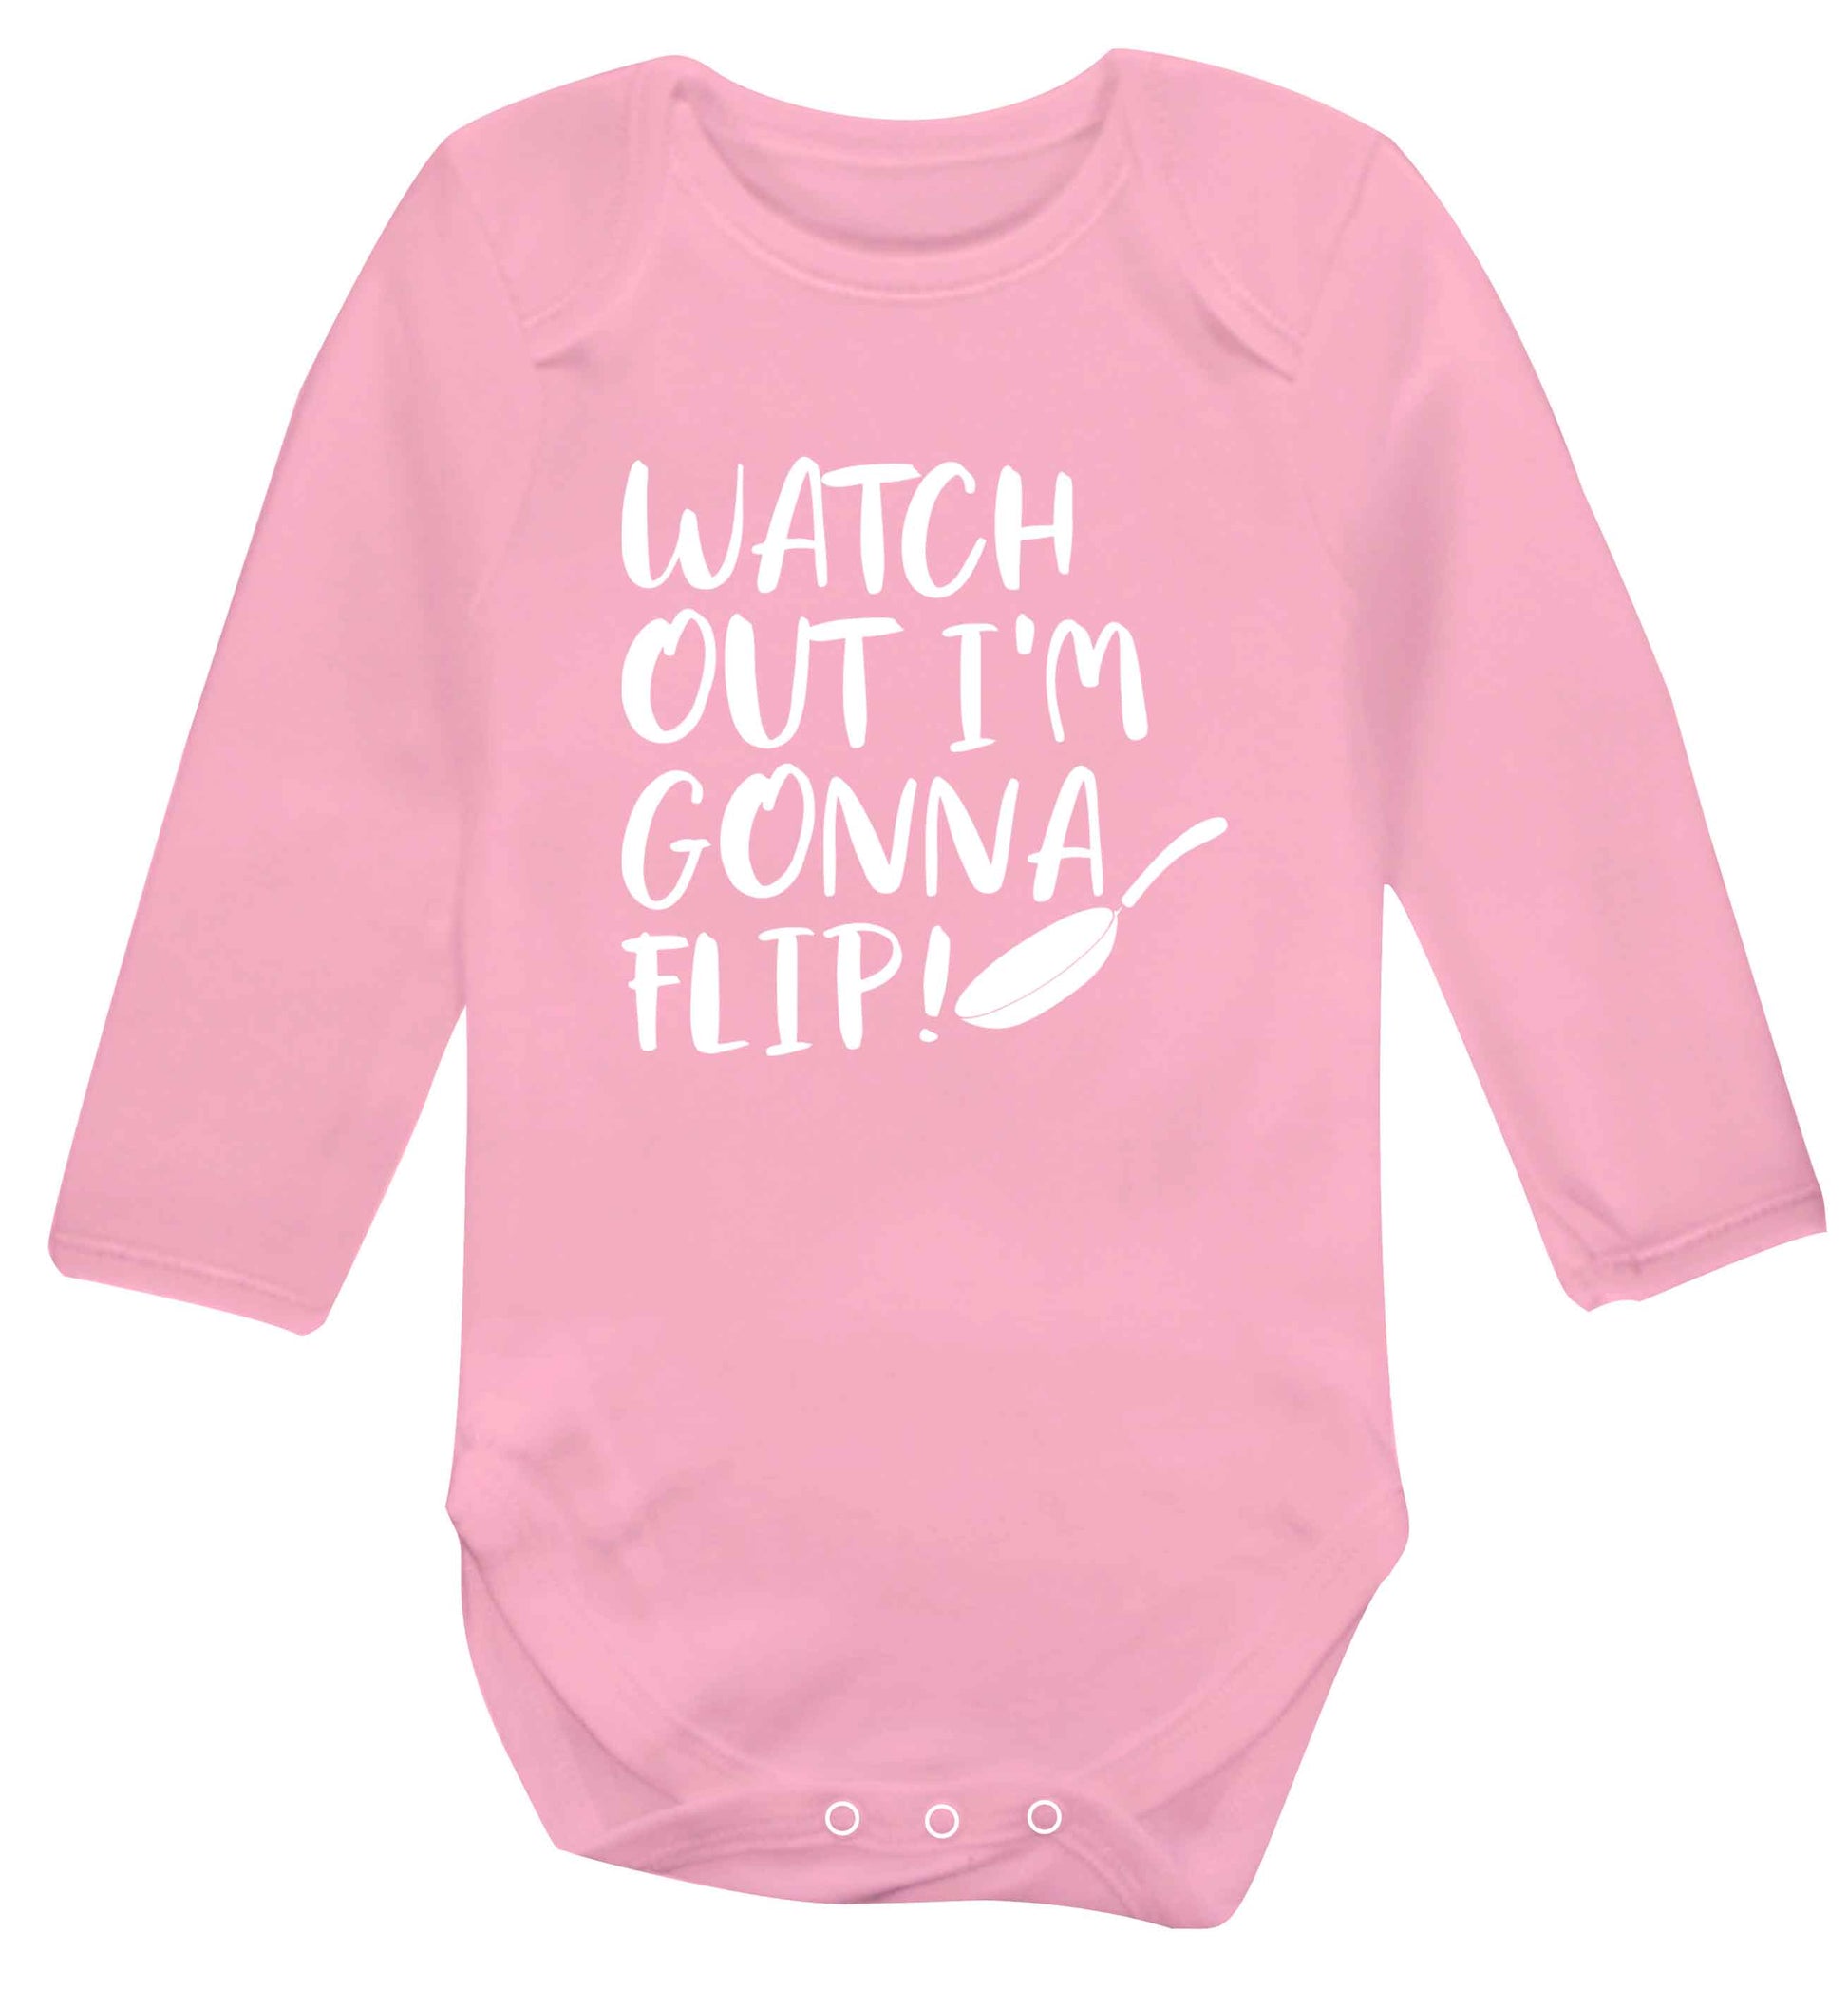 Watch out I'm gonna flip! baby vest long sleeved pale pink 6-12 months